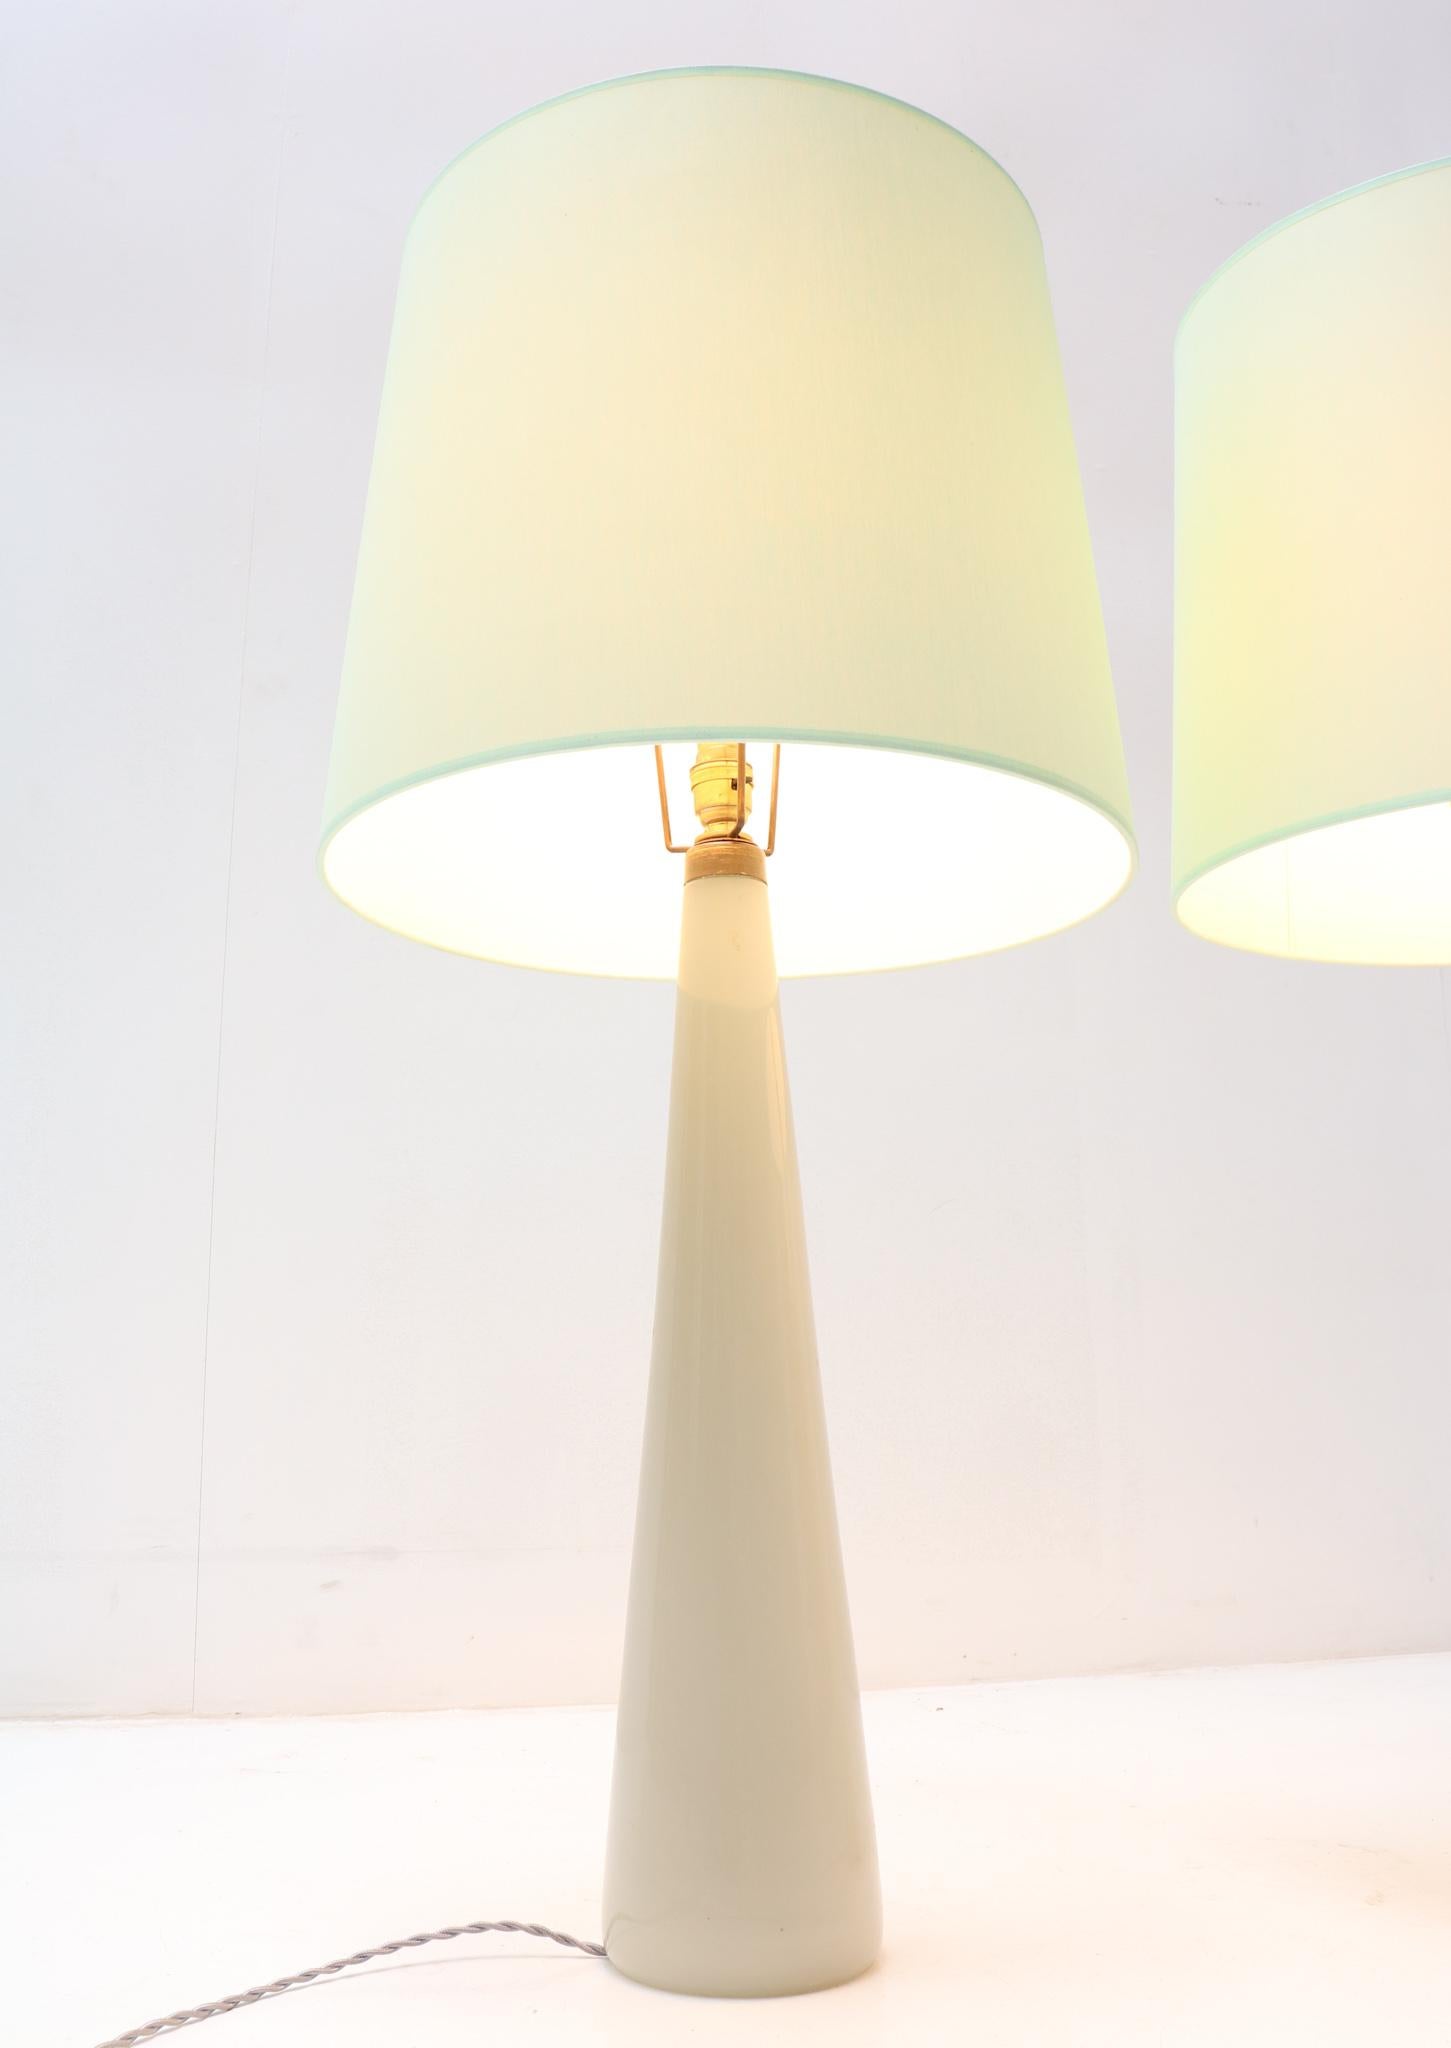 Two Mid-Century Modern Opaline Table Lamps by Archimede Seguso Murano, 1970s For Sale 5